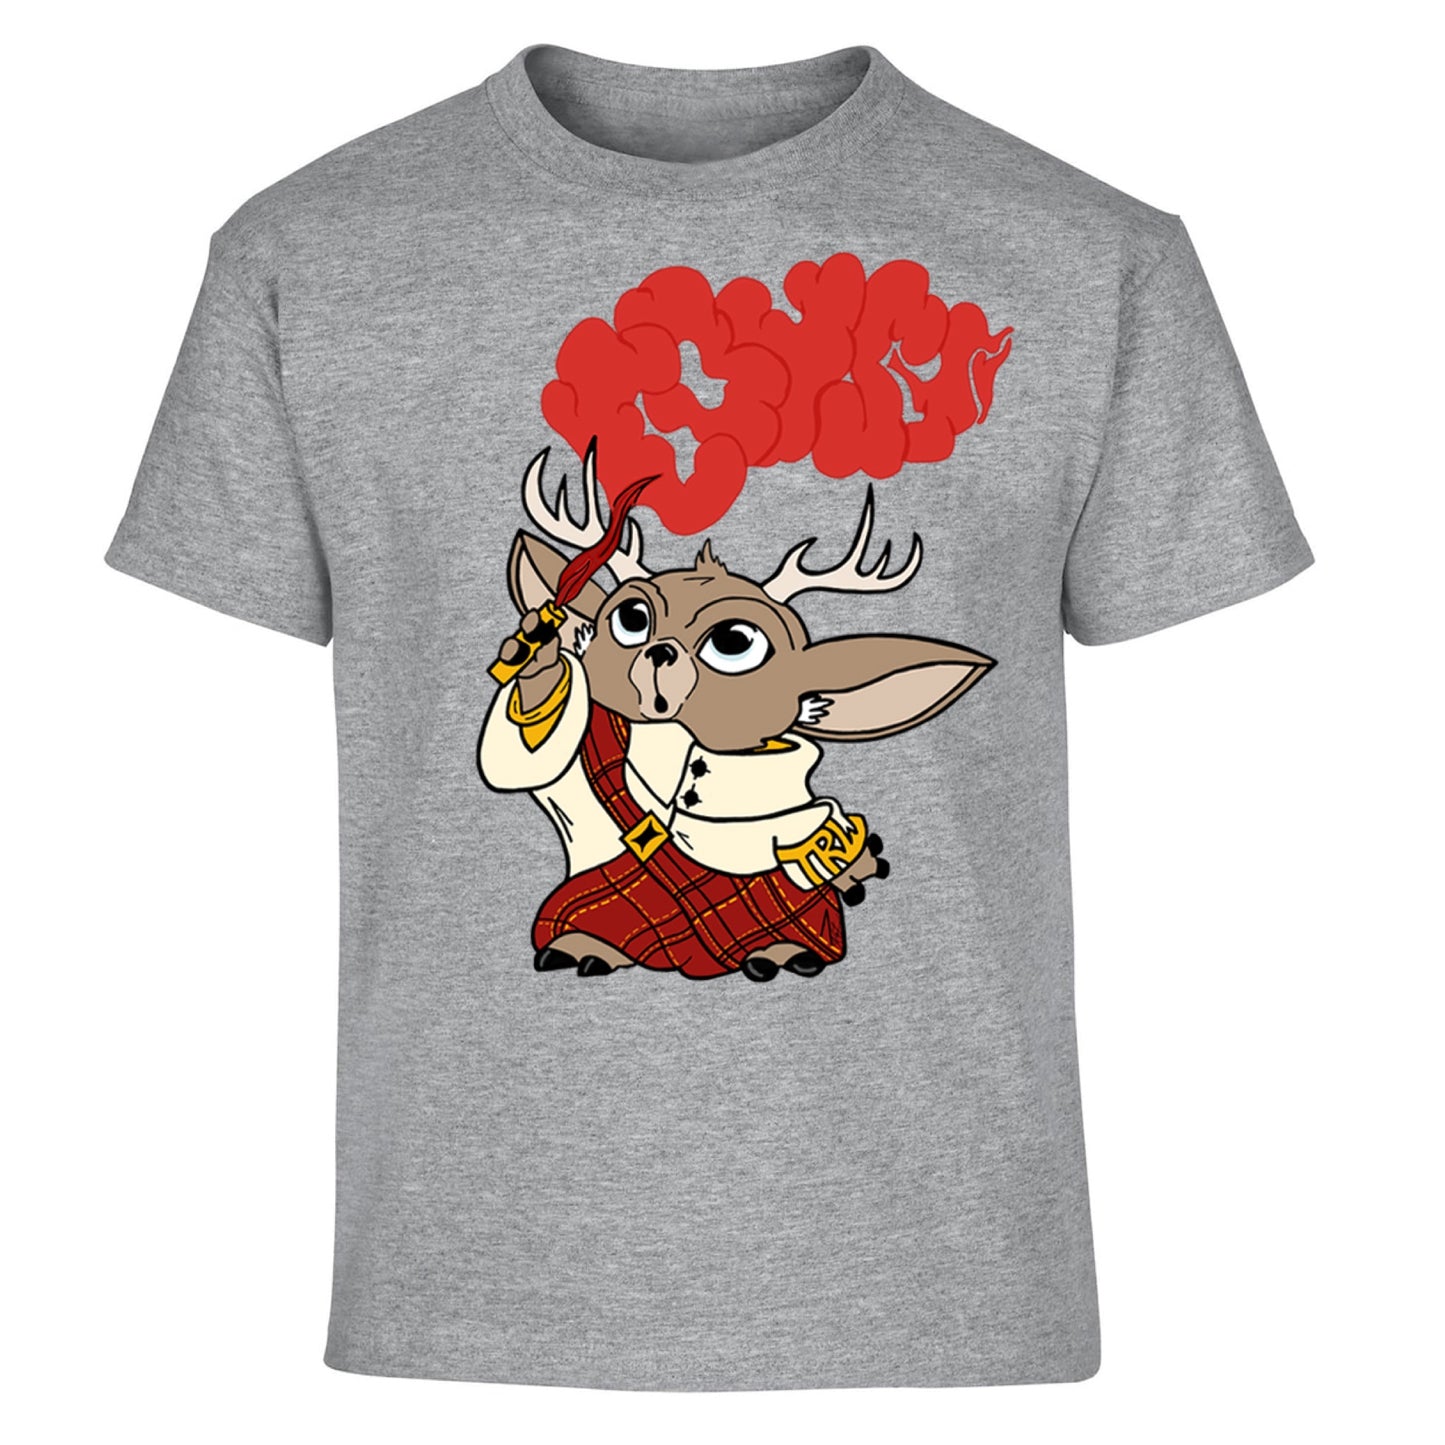 "Come On You Stags" Buckshot Tee - *PRE-ORDER